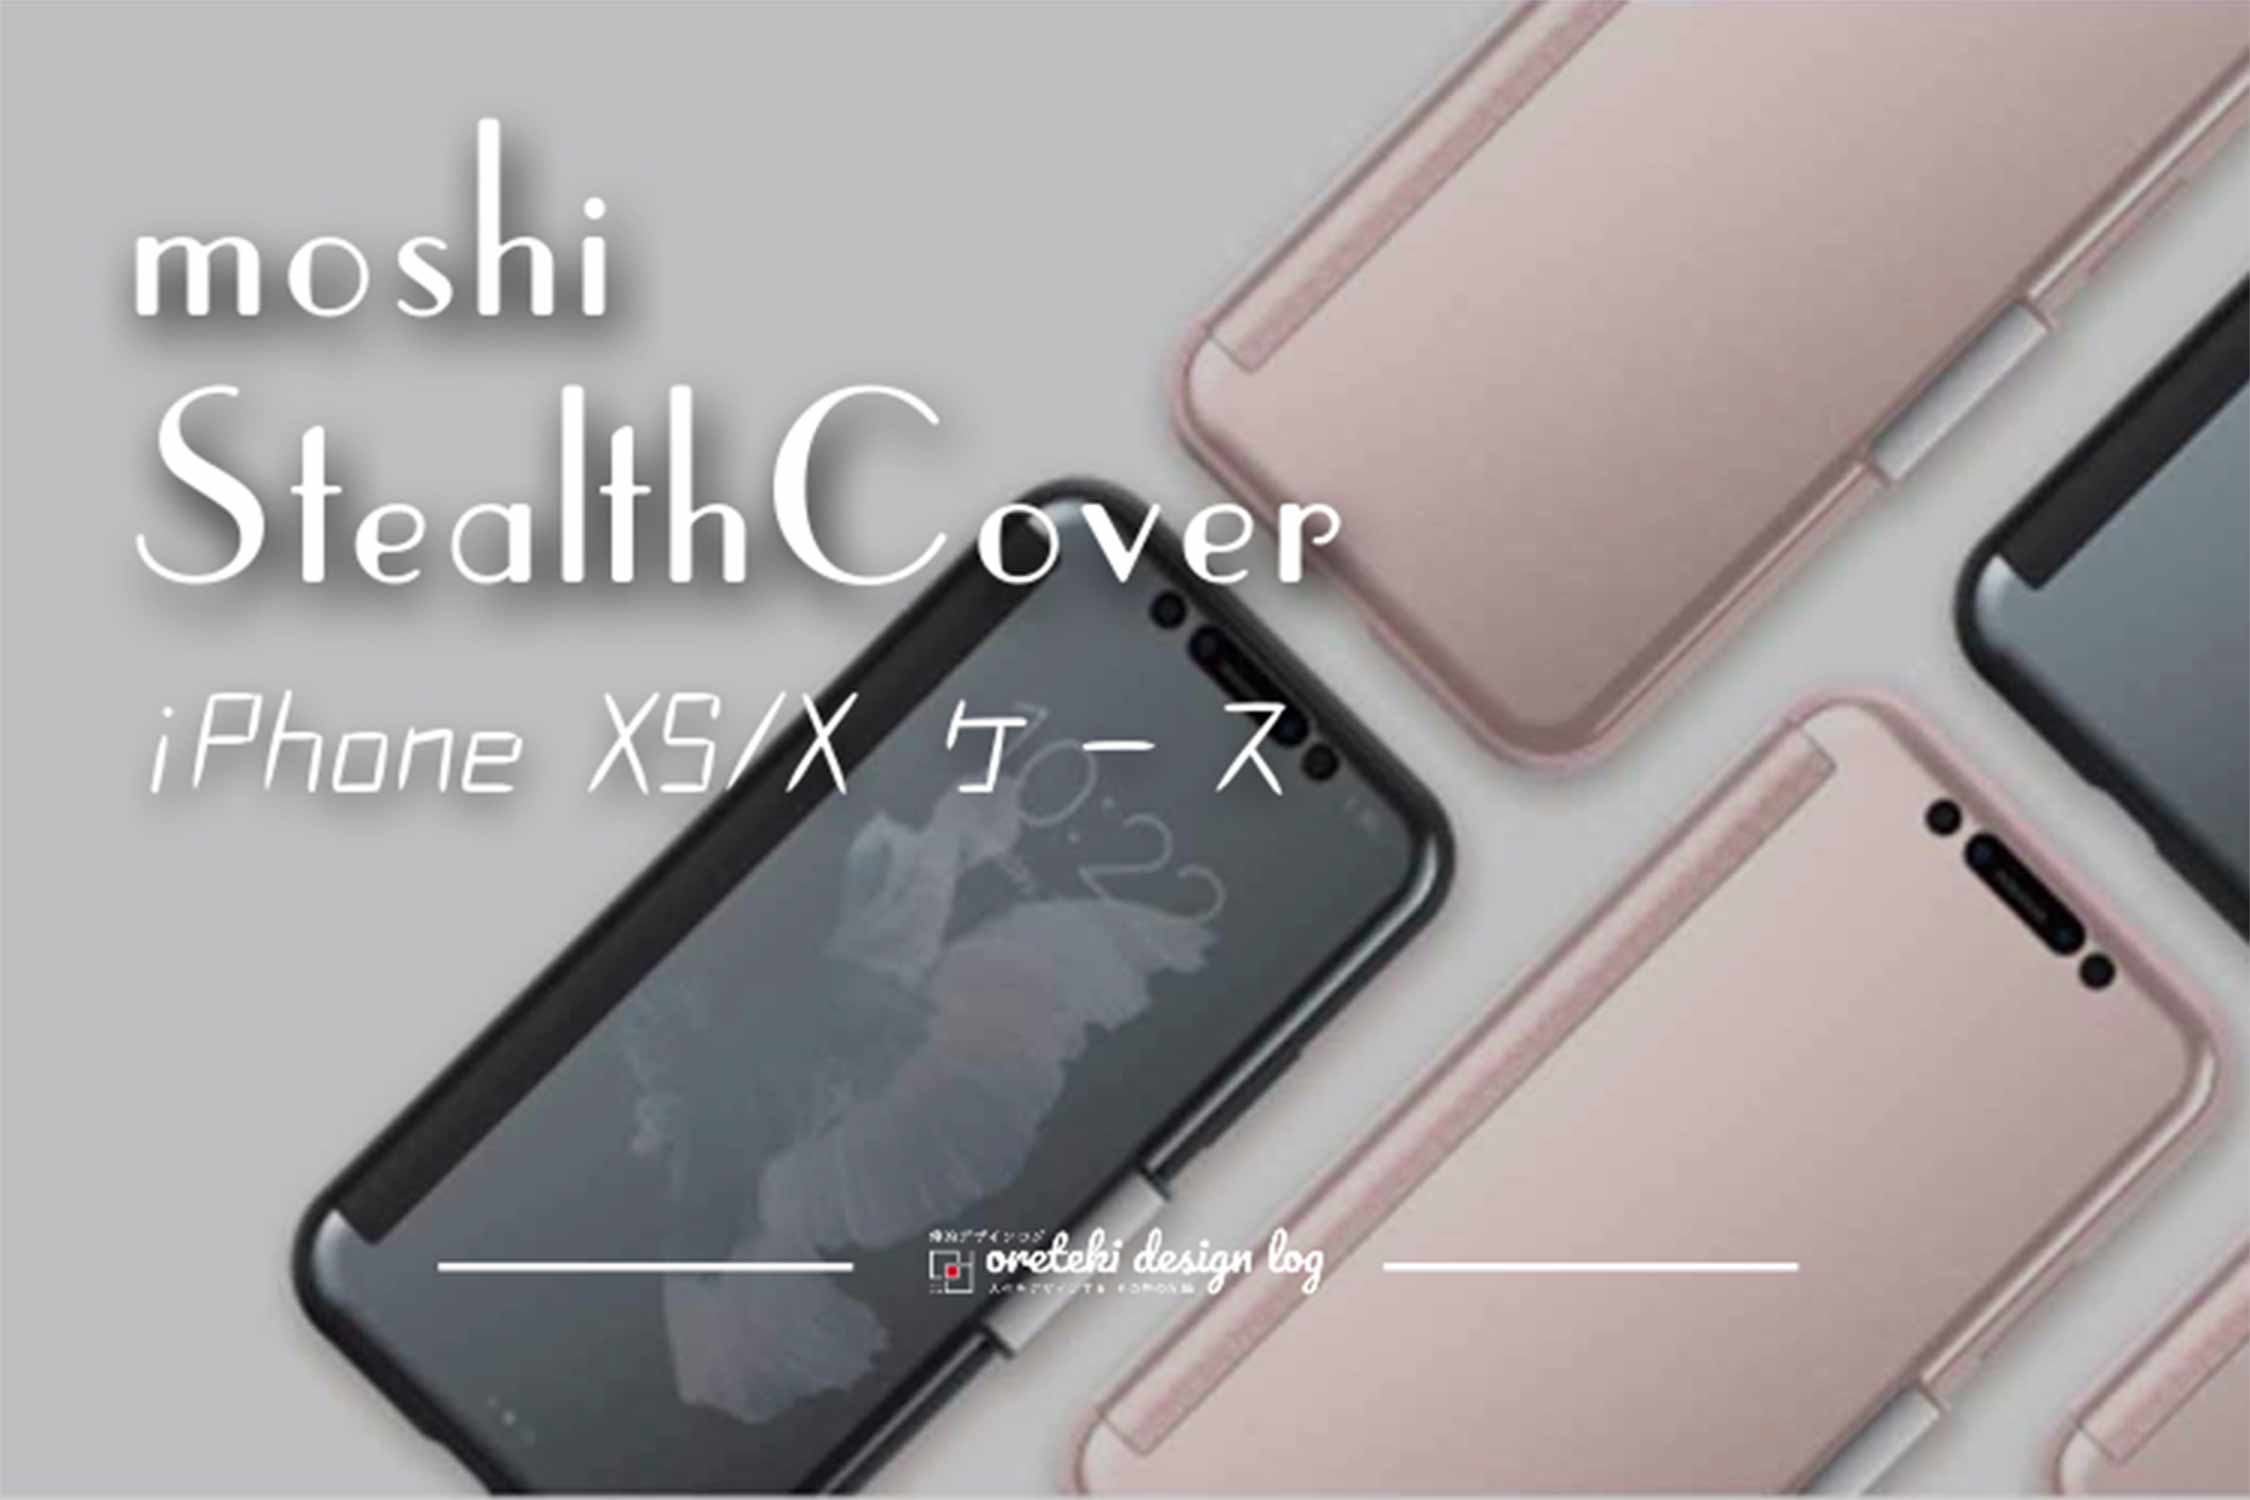 StealthCover iPhone XS 記事 アイキャッチ